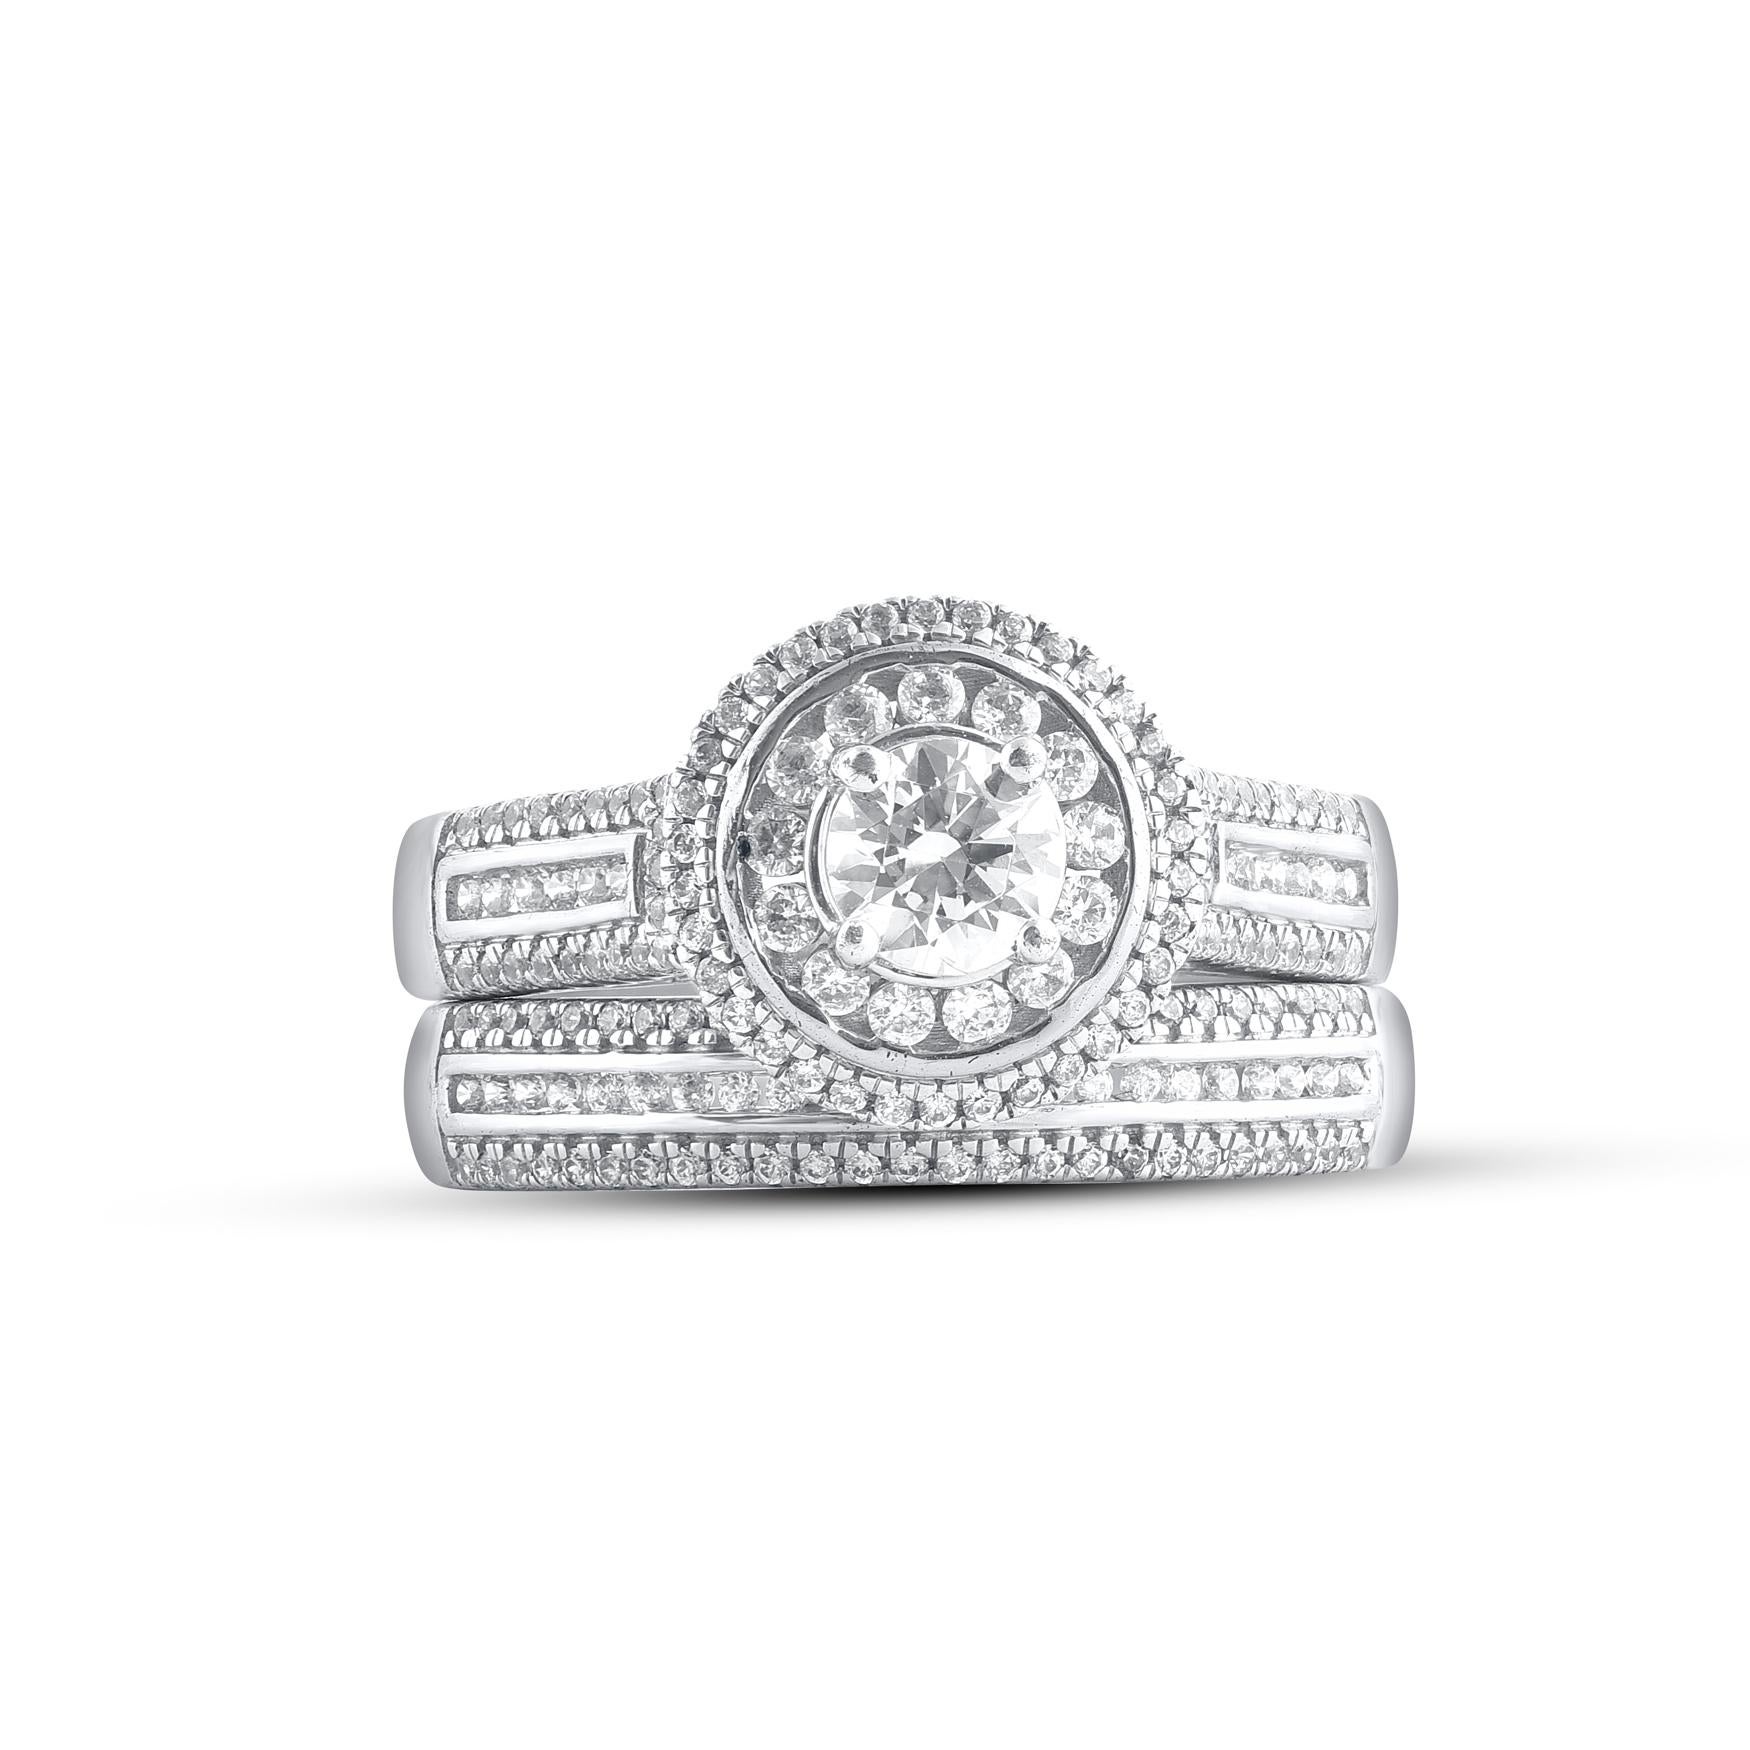 Bold and romantic, Give her a sophisticated reminder of your love with this diamond ring set. Crafted in 14 Karat white gold. This wedding ring features a sparkling 174 single cut and brilliant cut round diamonds beautifully set in prong, pave and